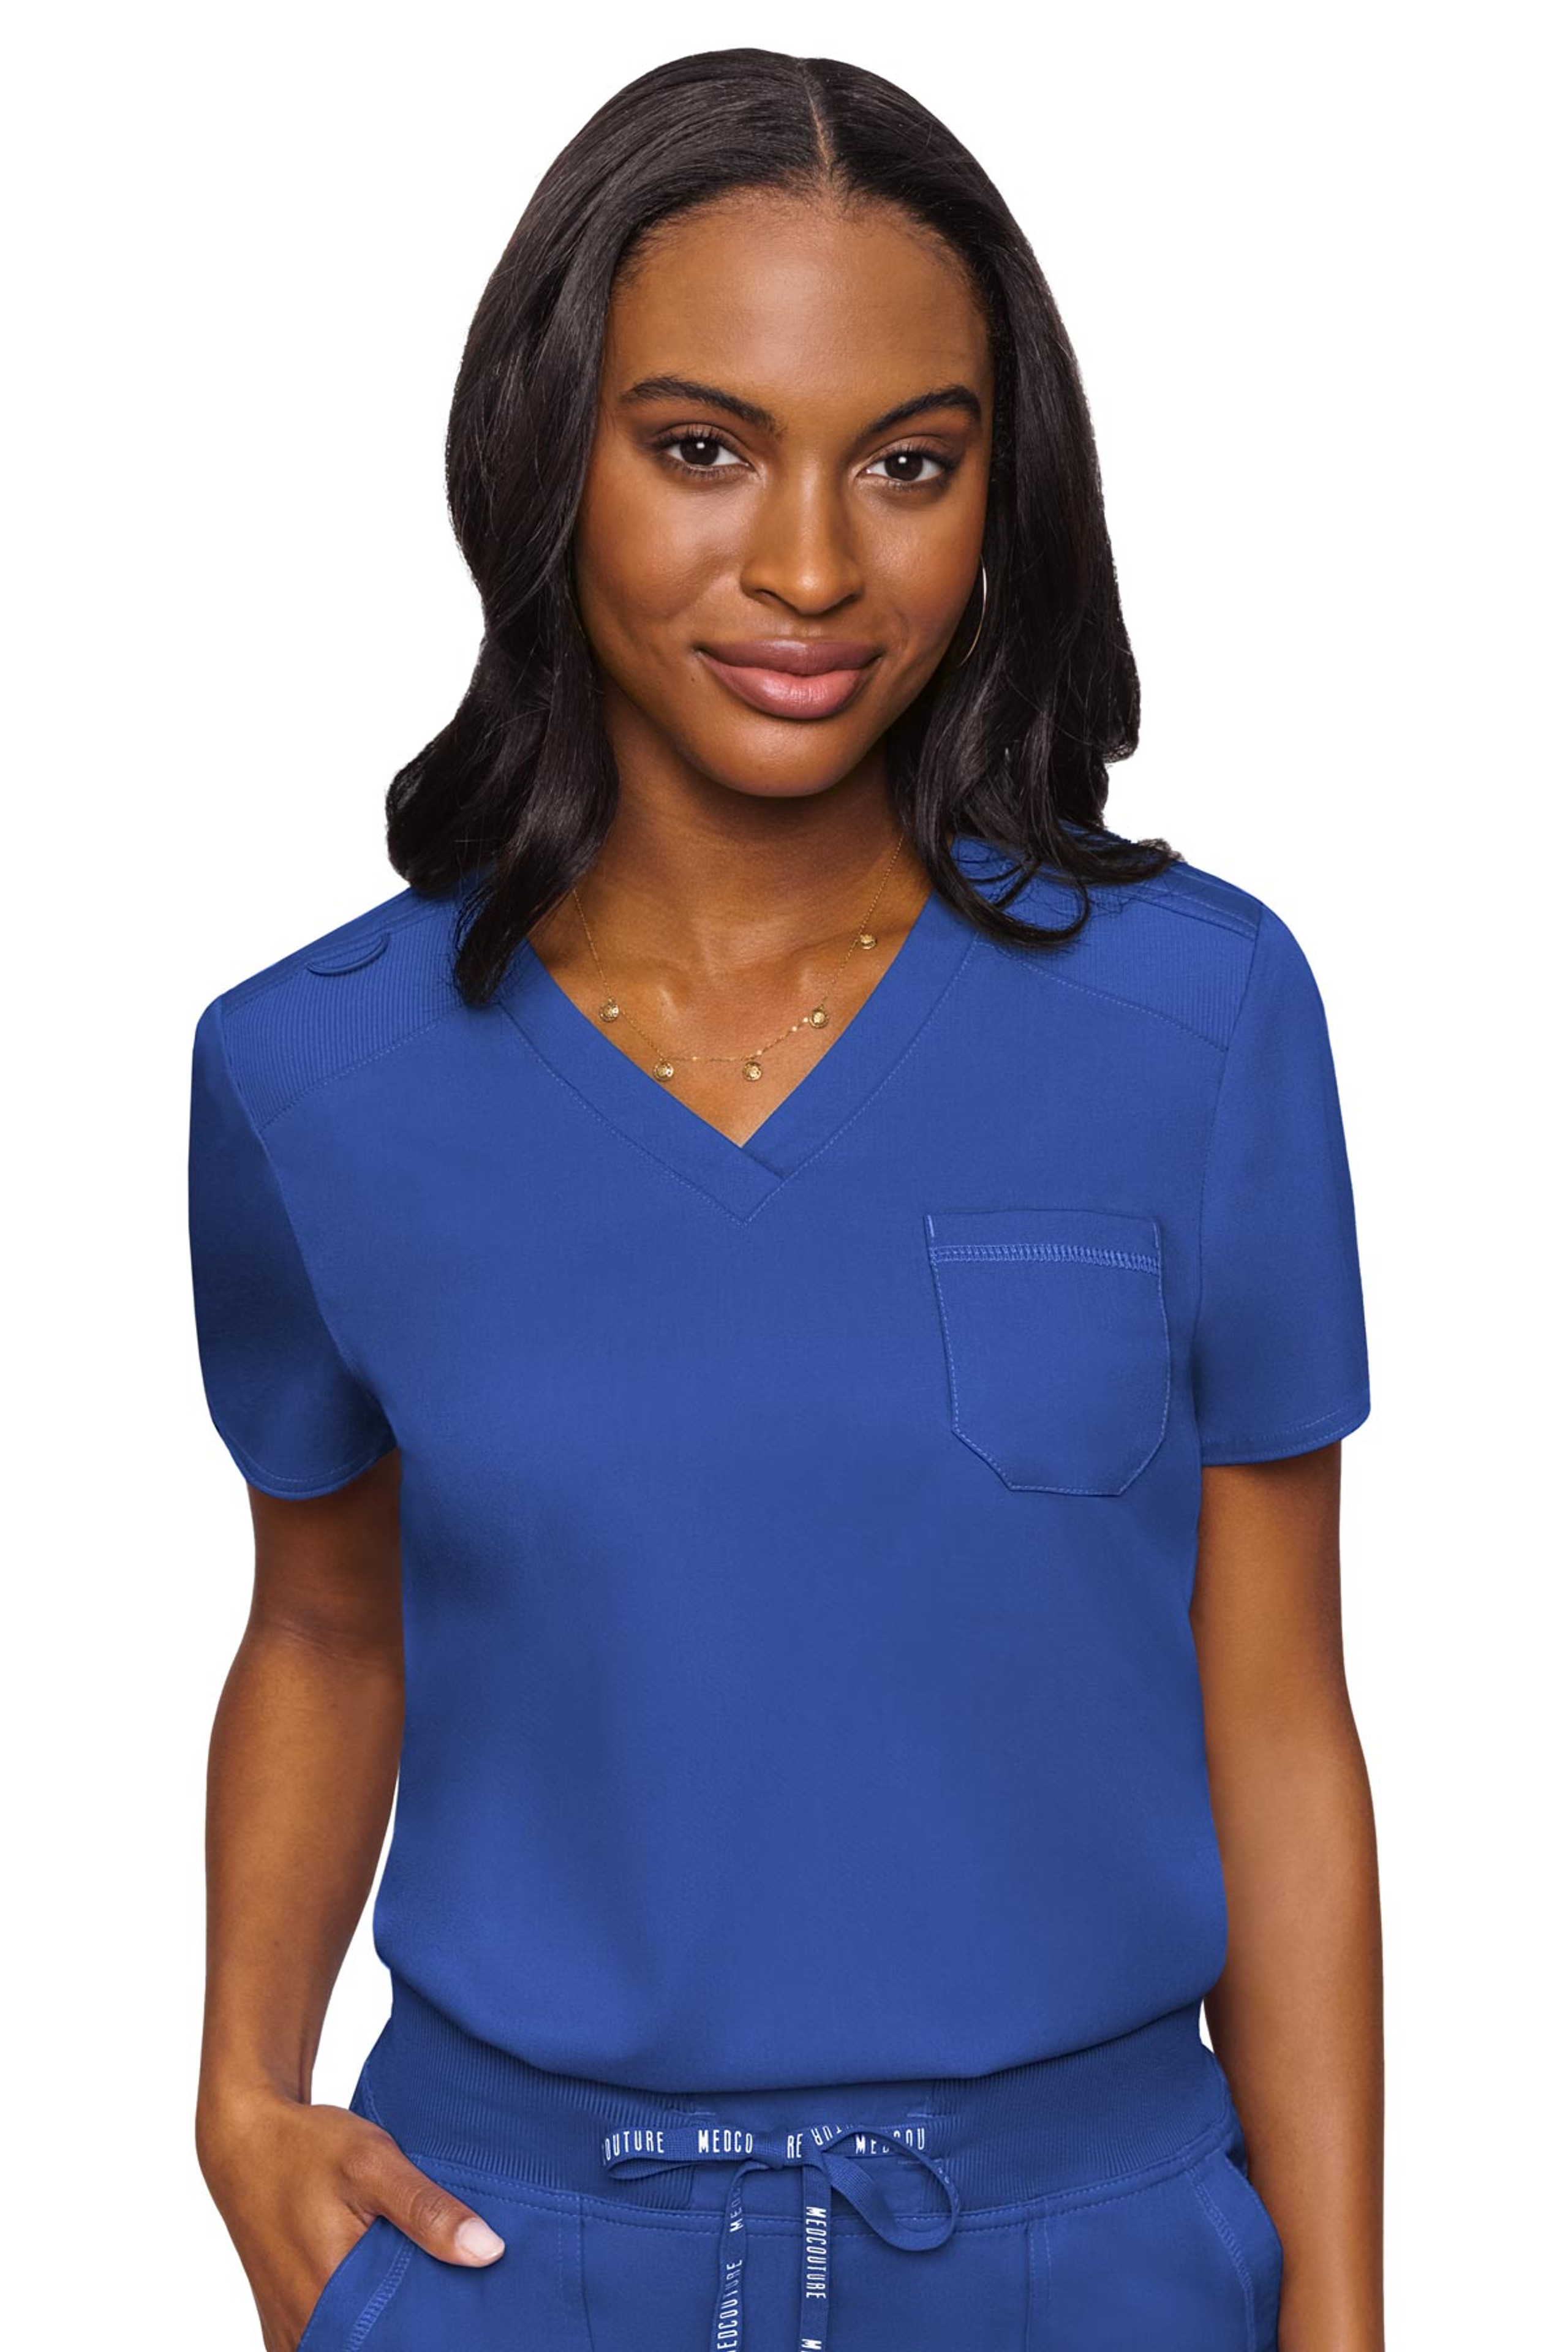 Med Couture Insight 3 Pocket Top MC2411 - The Uniform Outlet